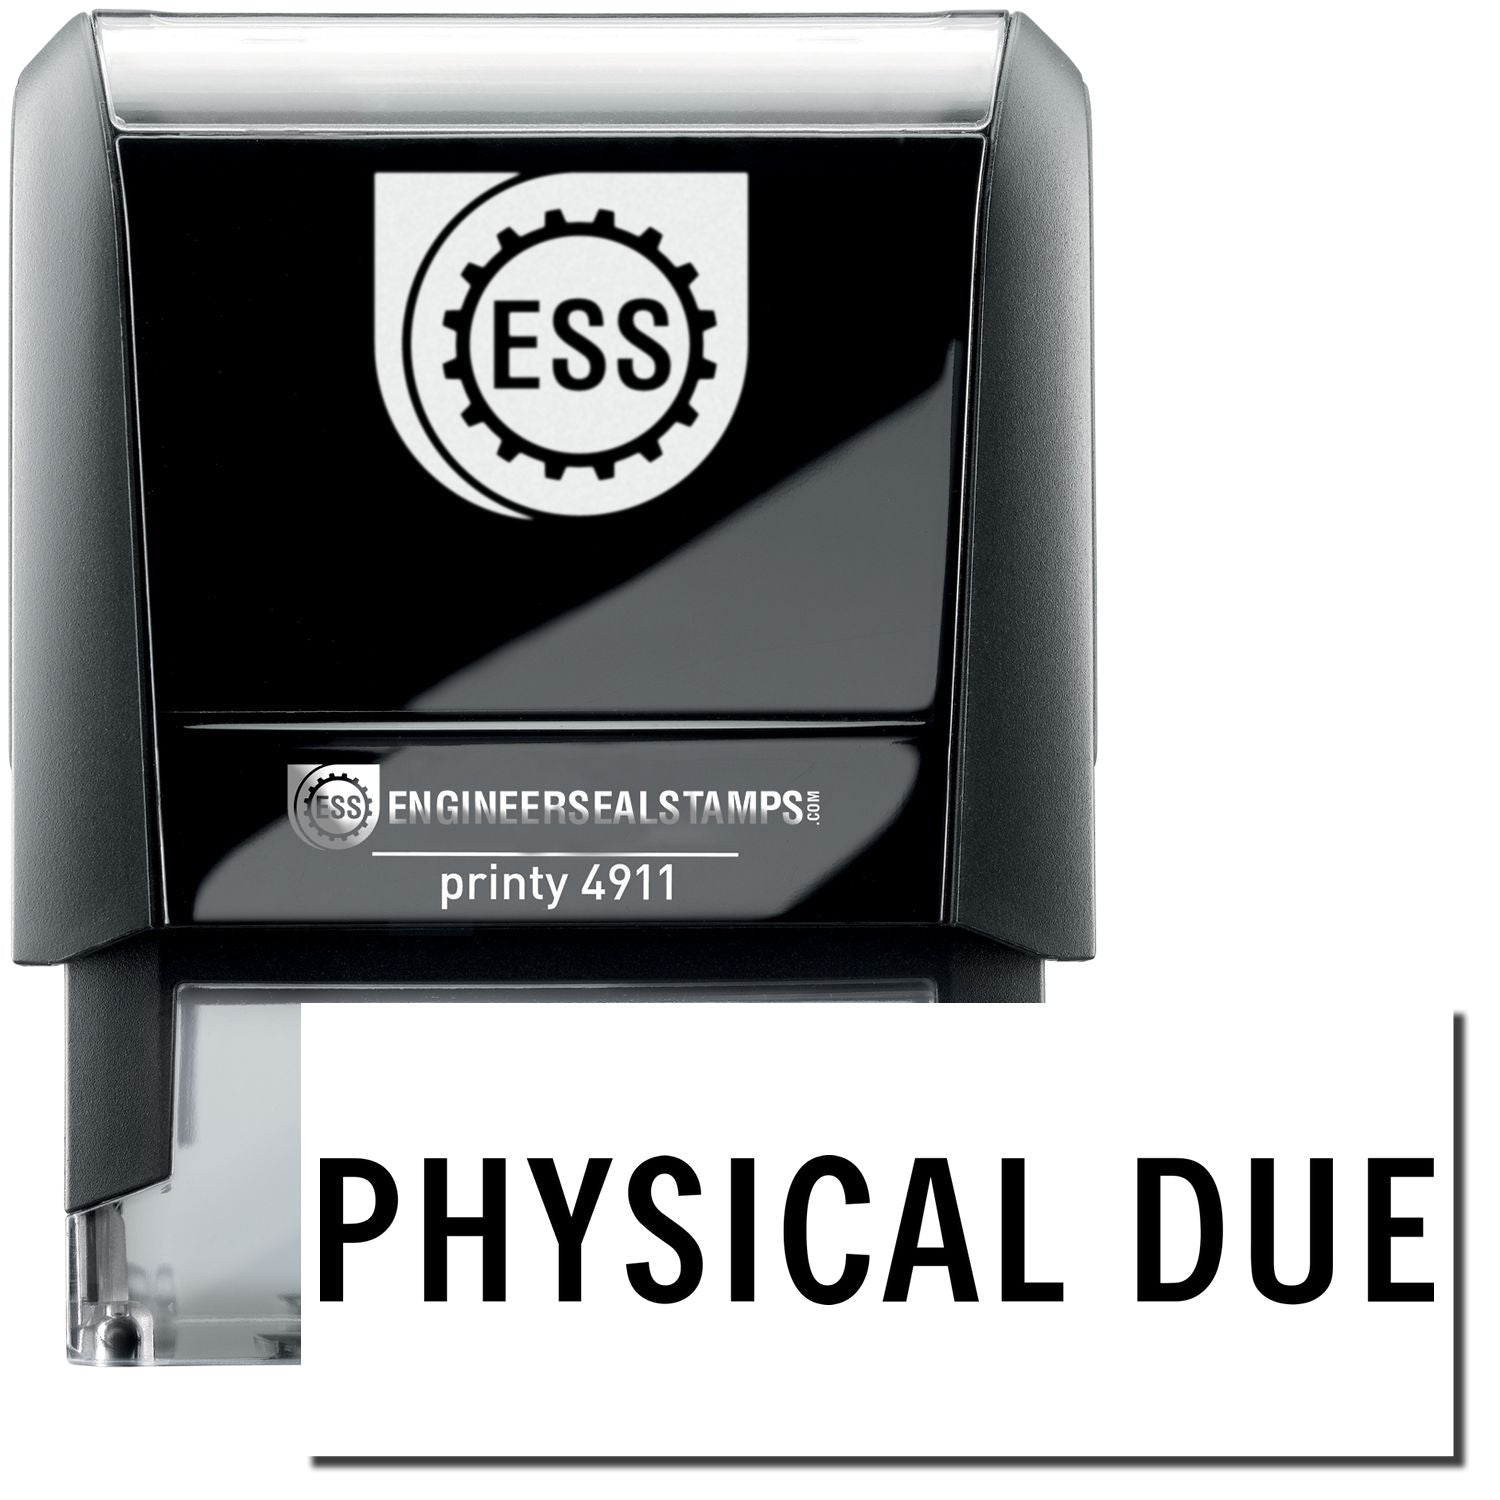 A self-inking stamp with a stamped image showing how the text "PHYSICAL DUE" is displayed after stamping.